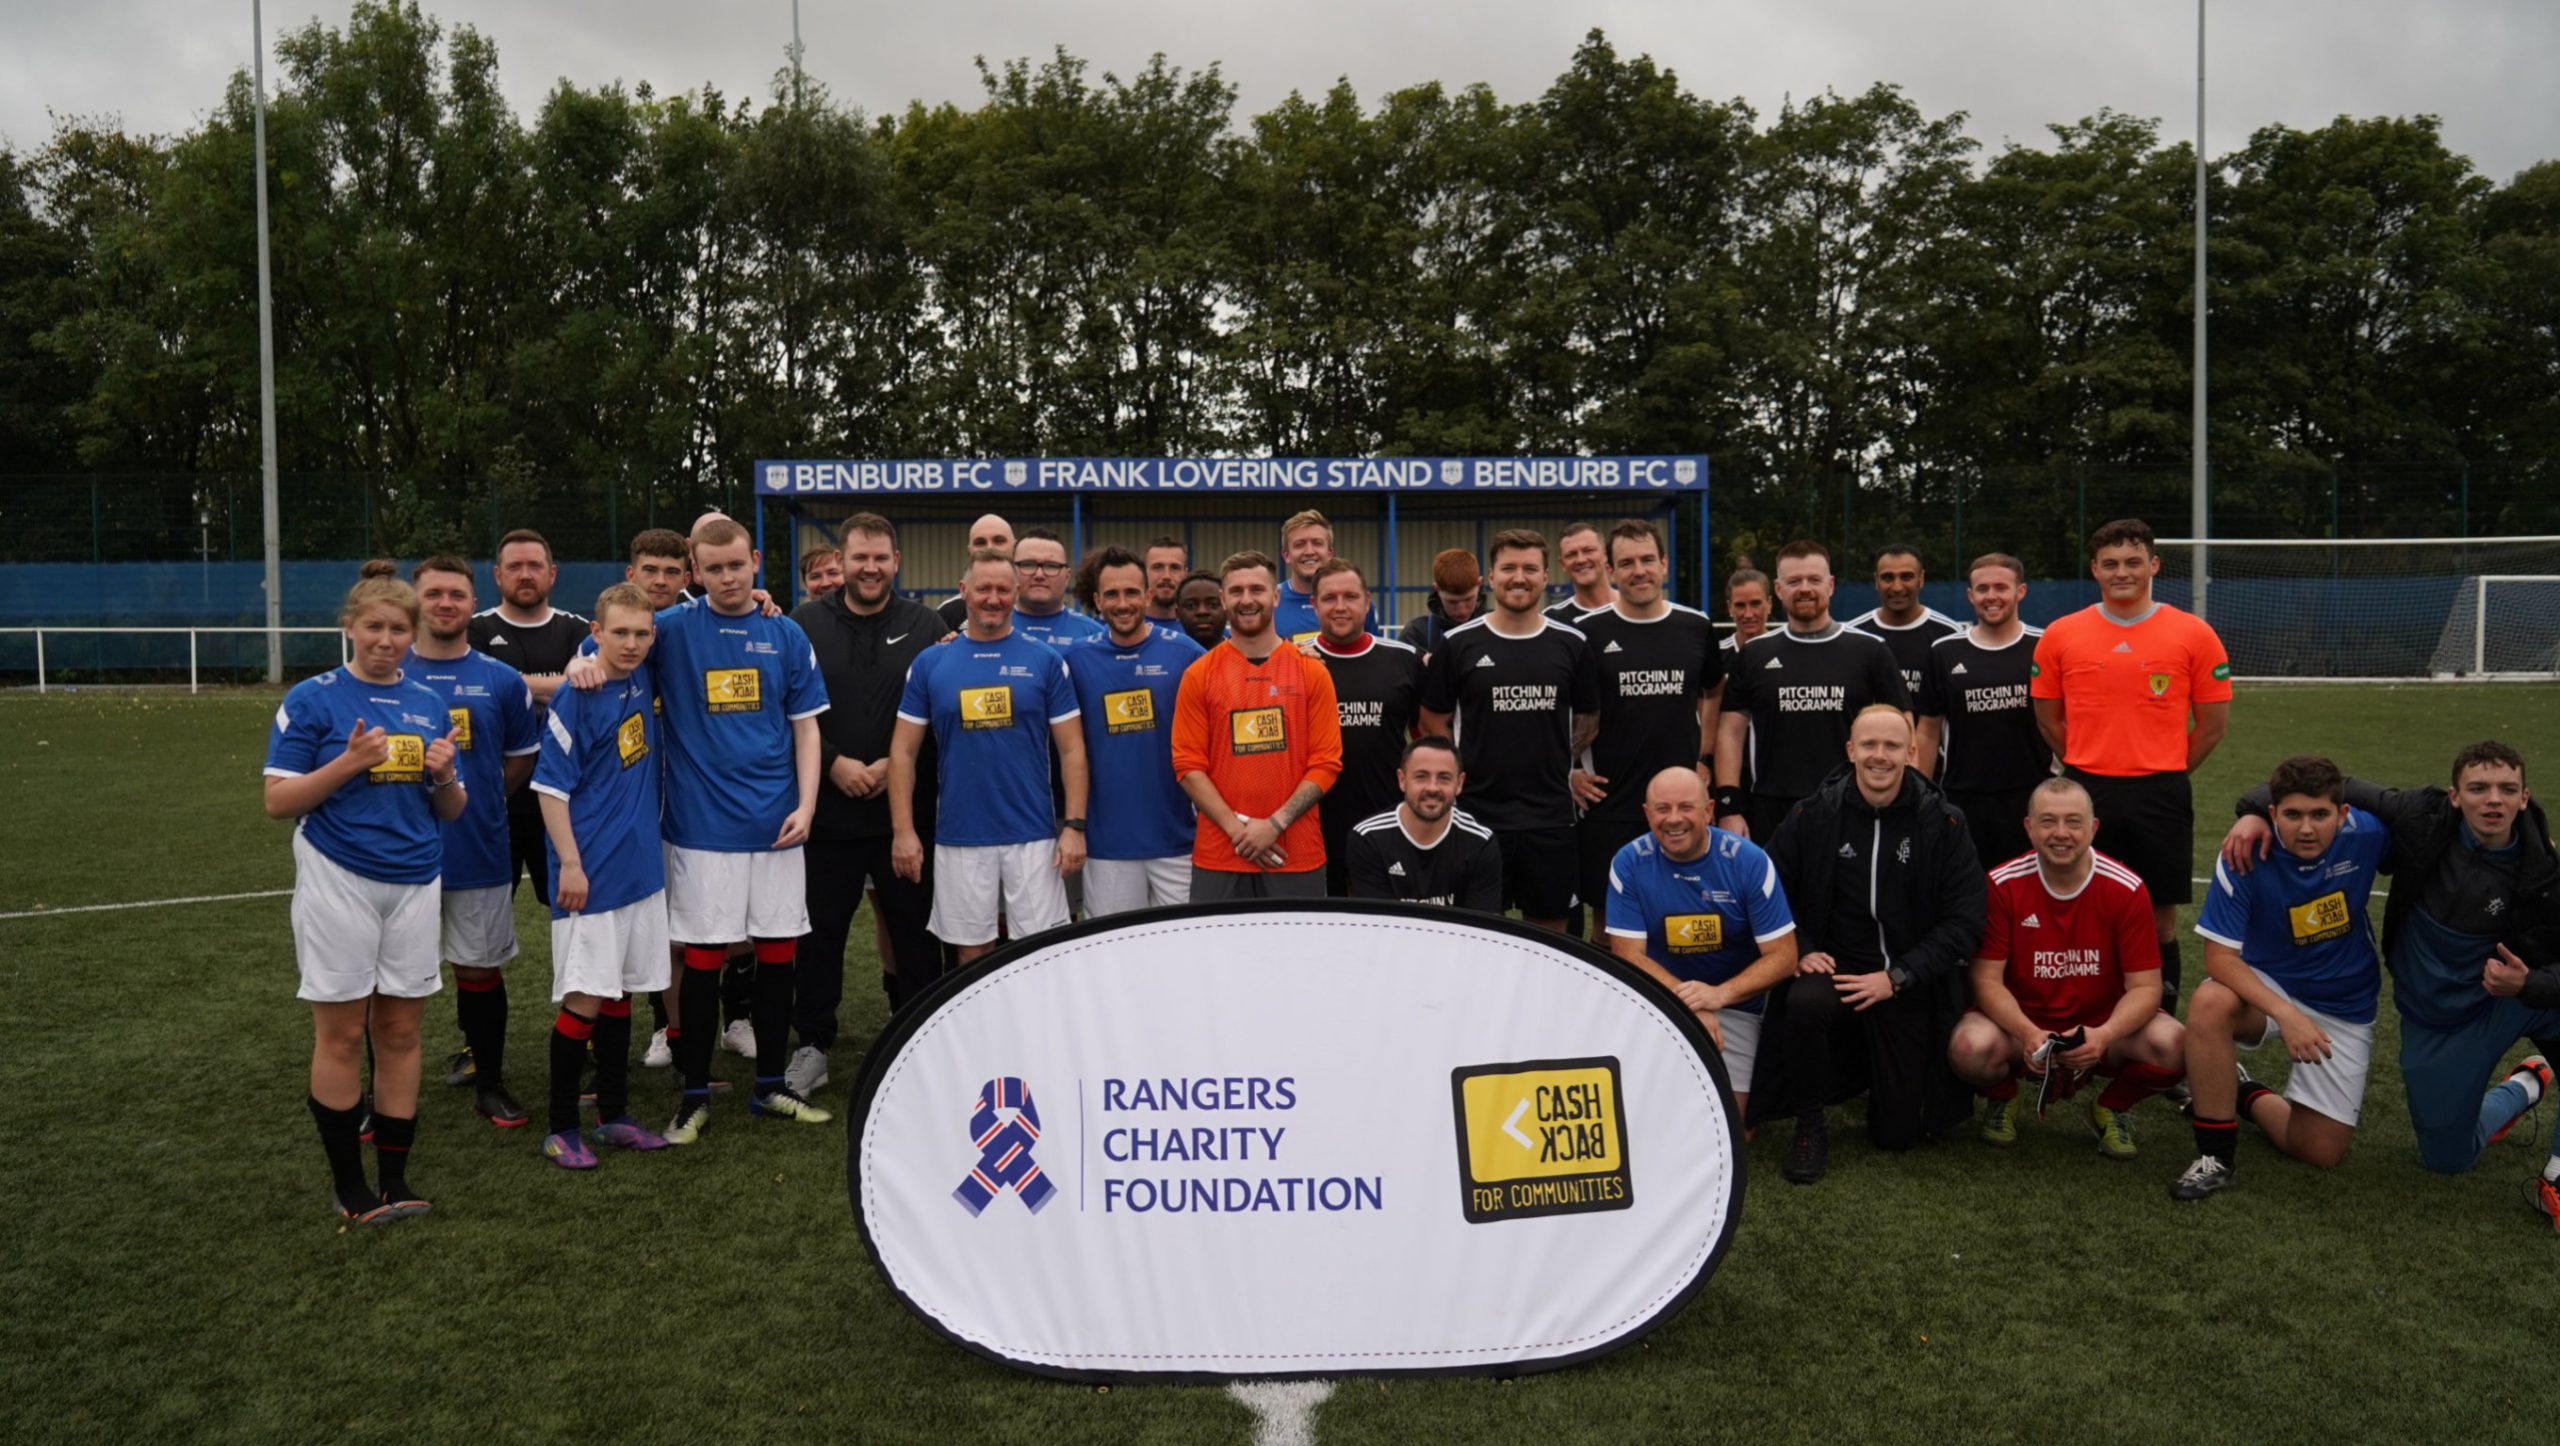 Group of people on football pitch with prop of Rangers charity Cash Back